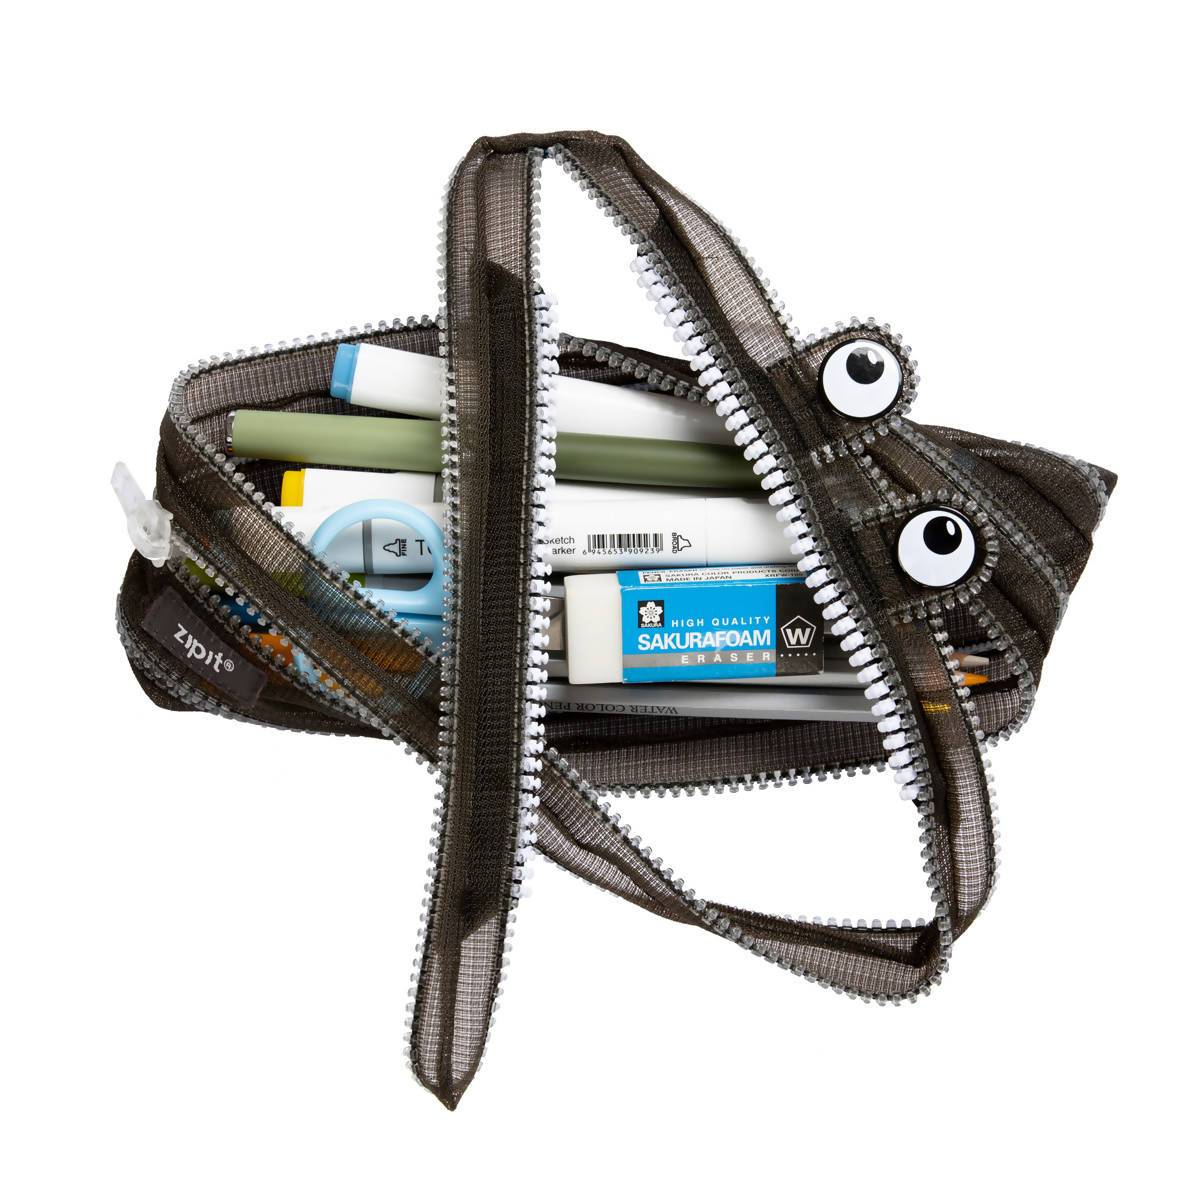 Zipit Mesh Monster Pouch Black - Pencil Cases - Zigzagme - Naiise